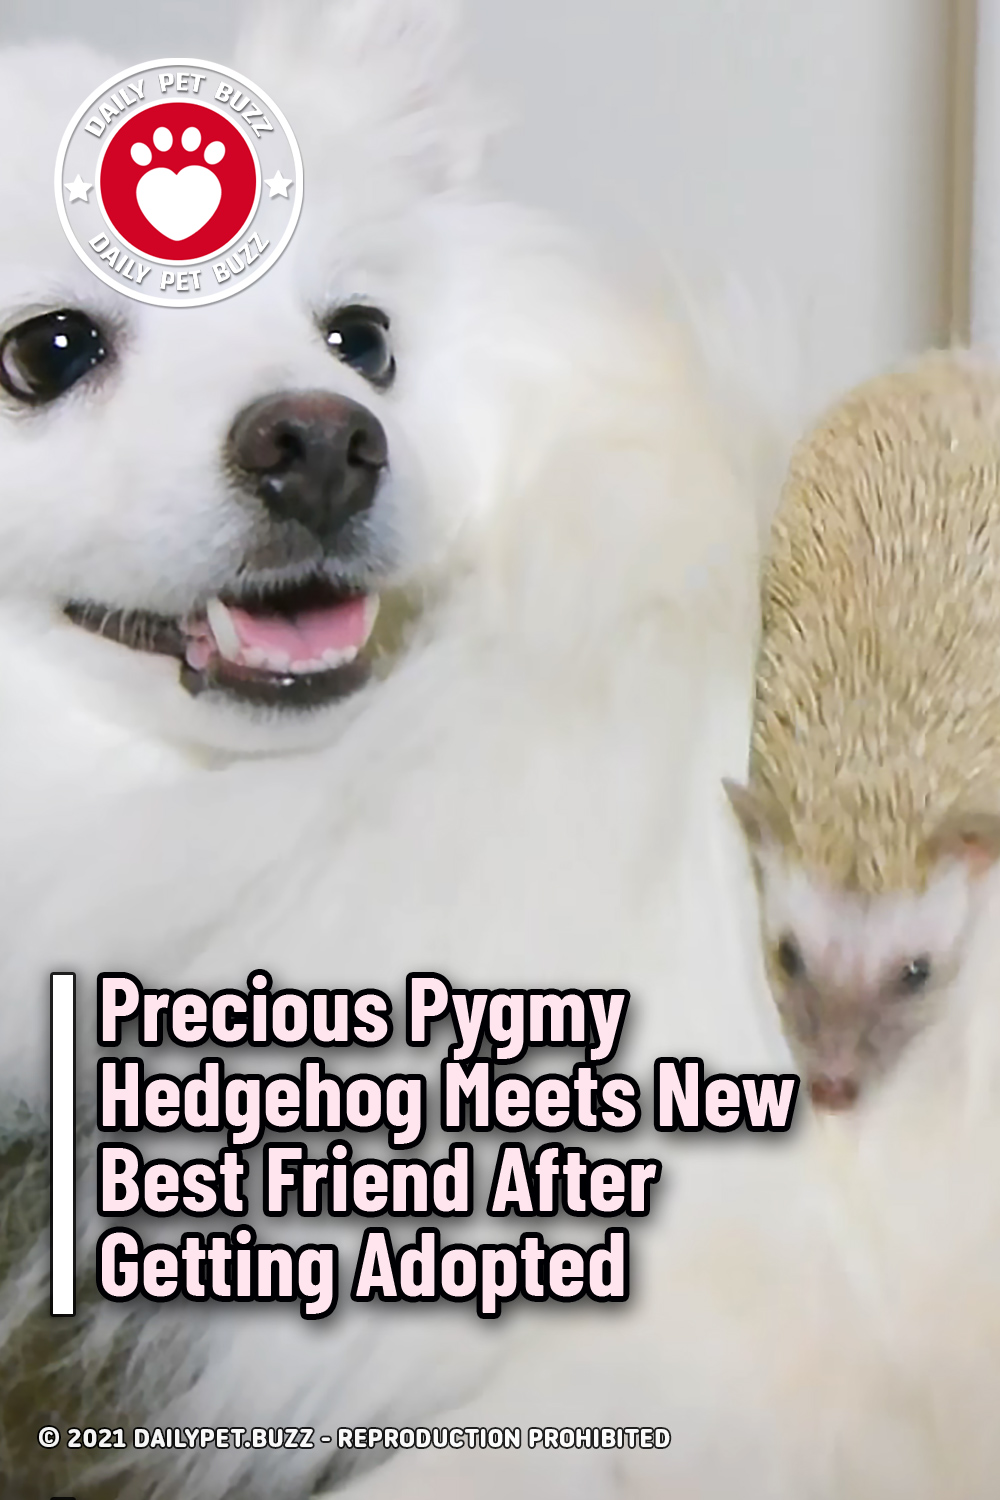 Precious Pygmy Hedgehog Meets New Best Friend After Getting Adopted